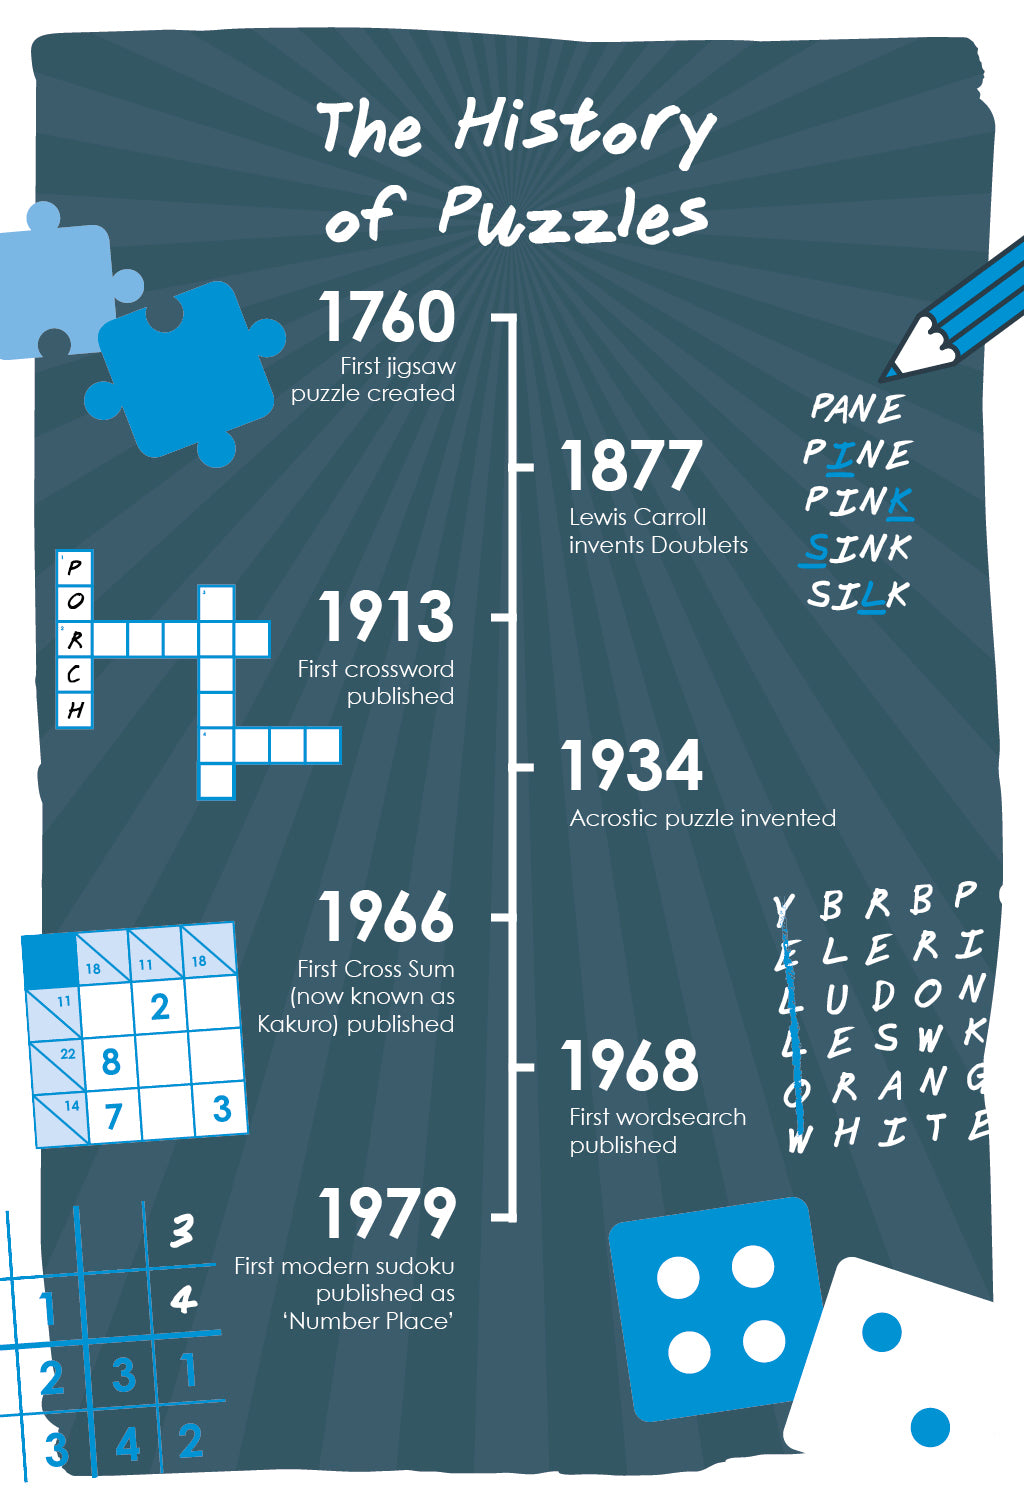 A Timeline of Modern Puzzles | A Puzzling History